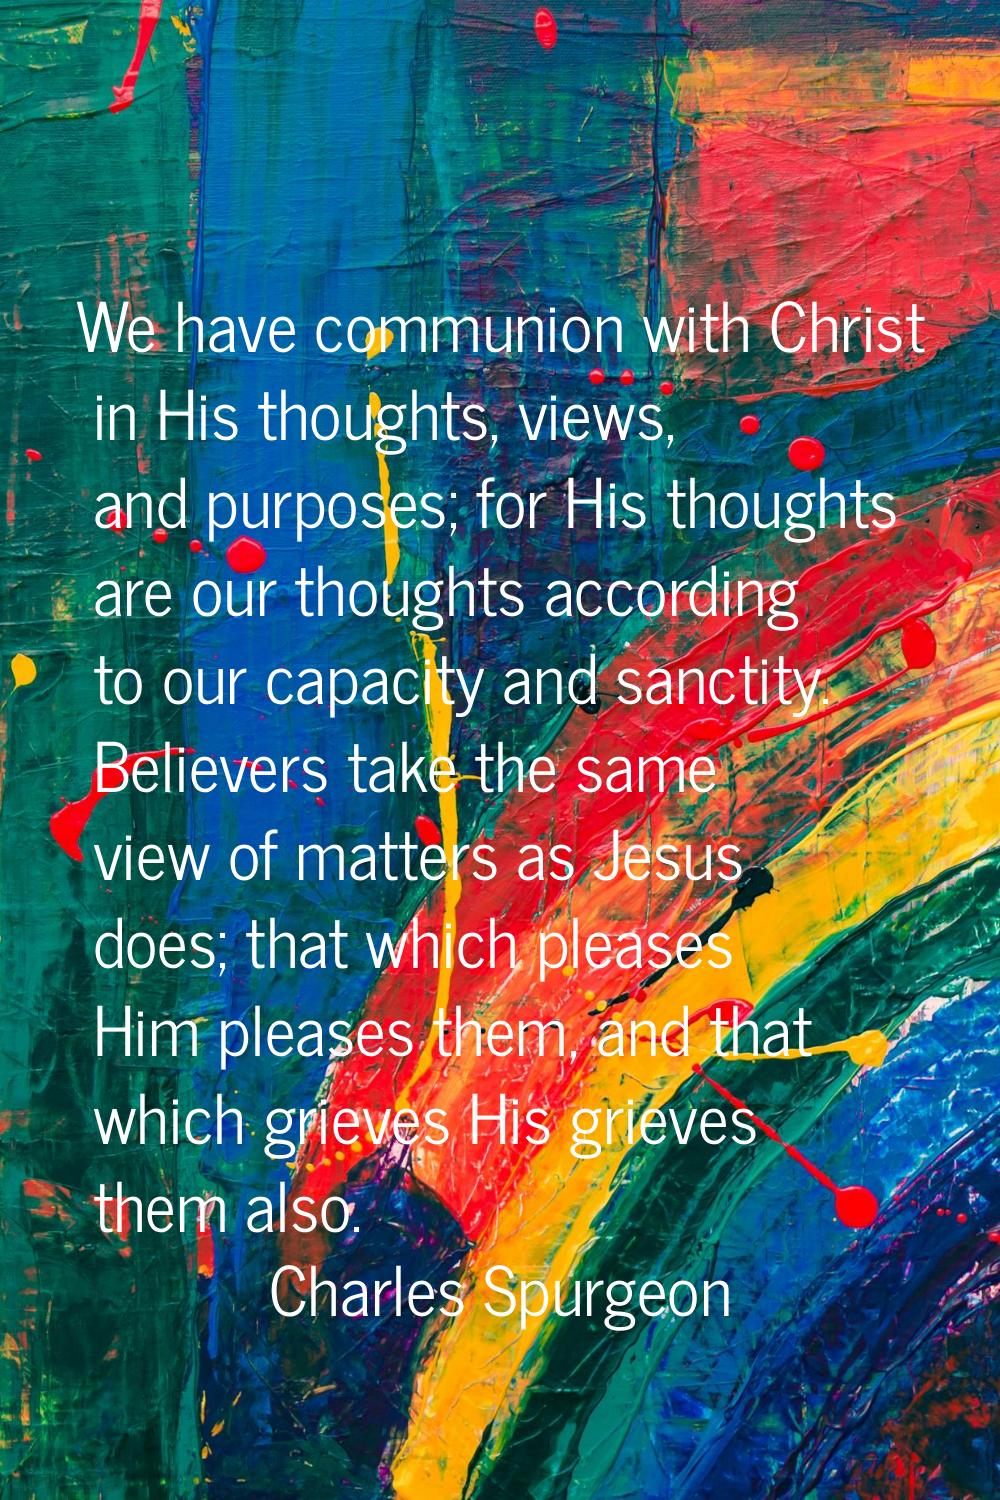 We have communion with Christ in His thoughts, views, and purposes; for His thoughts are our though